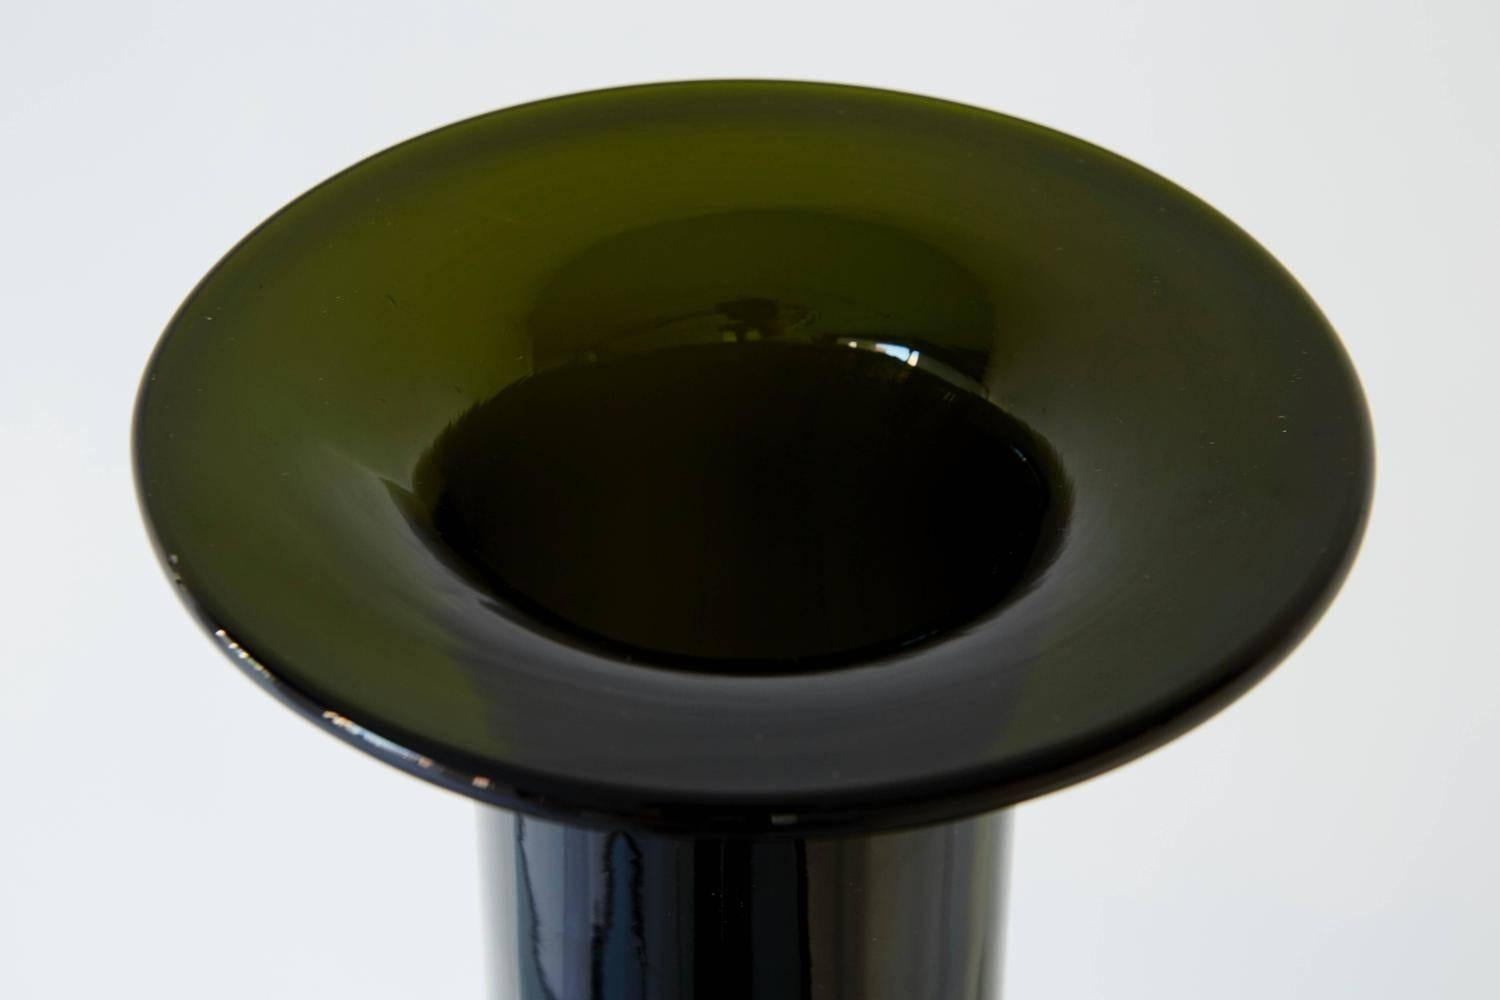 Pair of impressively scaled Scandinavian Modern XXL olive green vessels designed by Otto Brauer for Holmegaard.